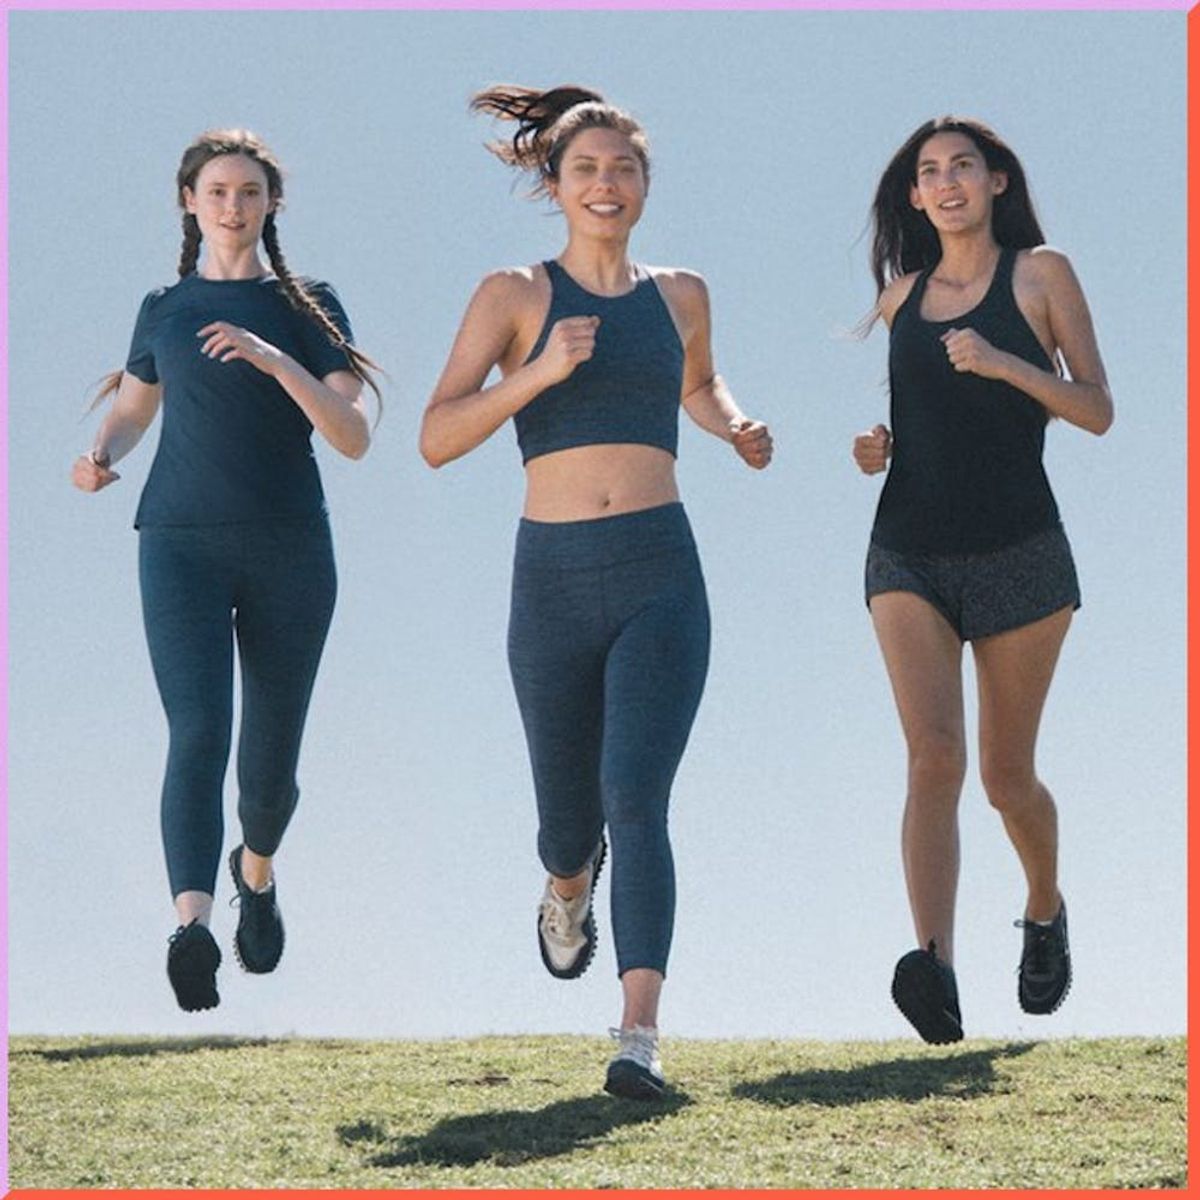 Outdoor Voices Just Launched an Activewear Version of Cher’s Clueless Closet